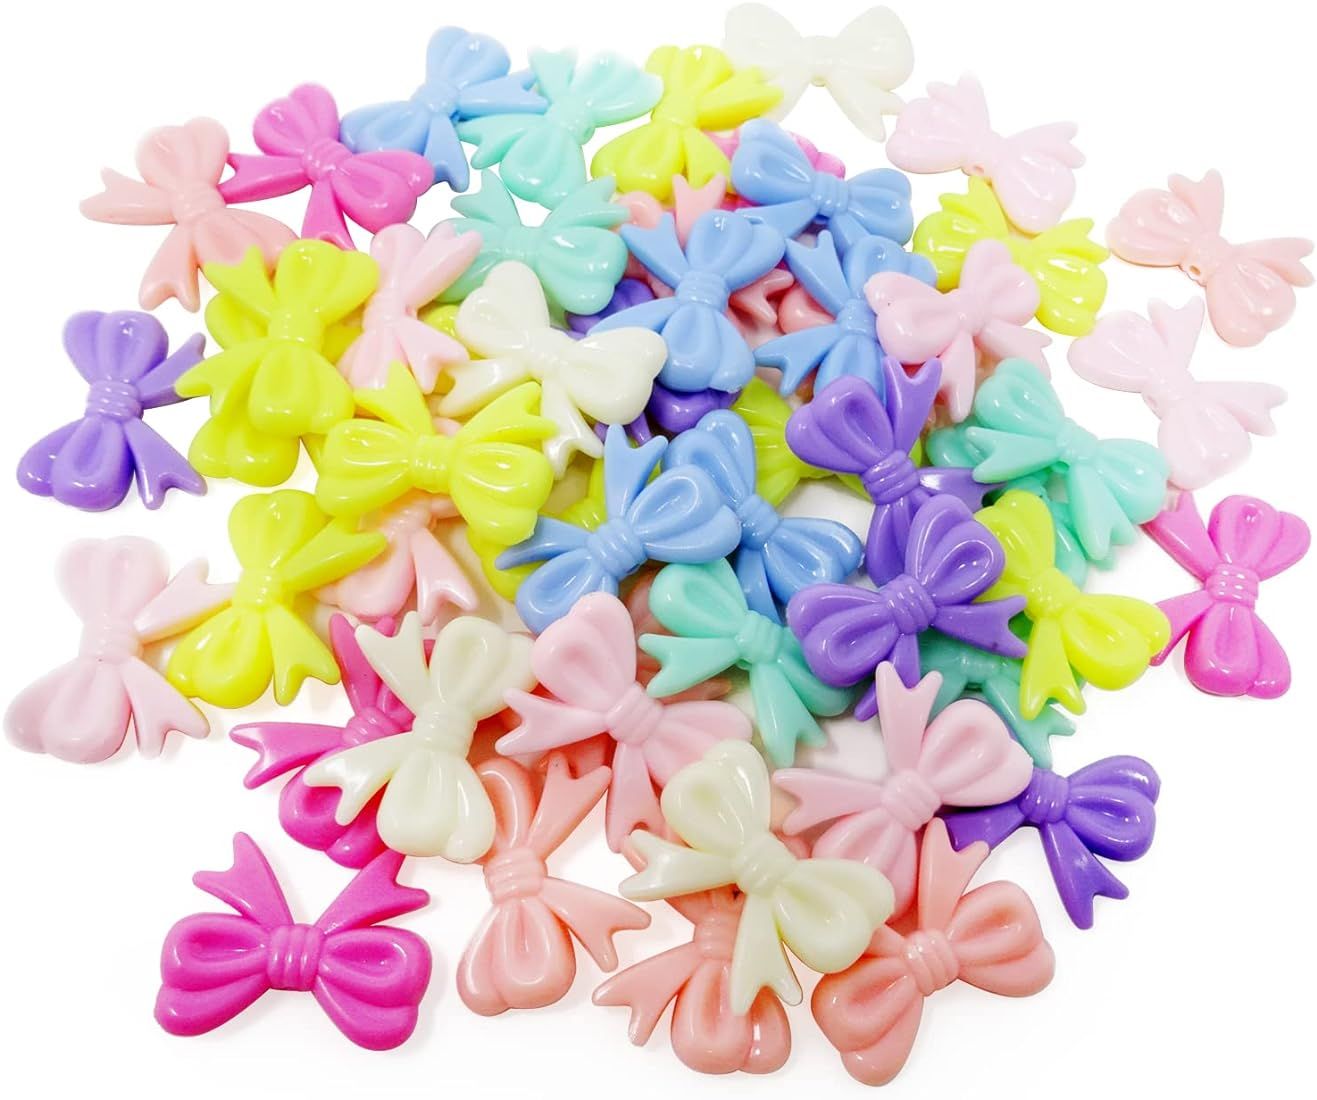 Honbay 100G(50pcs) Beautiful Acrylic Bow Beads for Jewelry Making or DIY Crafts - Assorted Colors | Amazon (US)